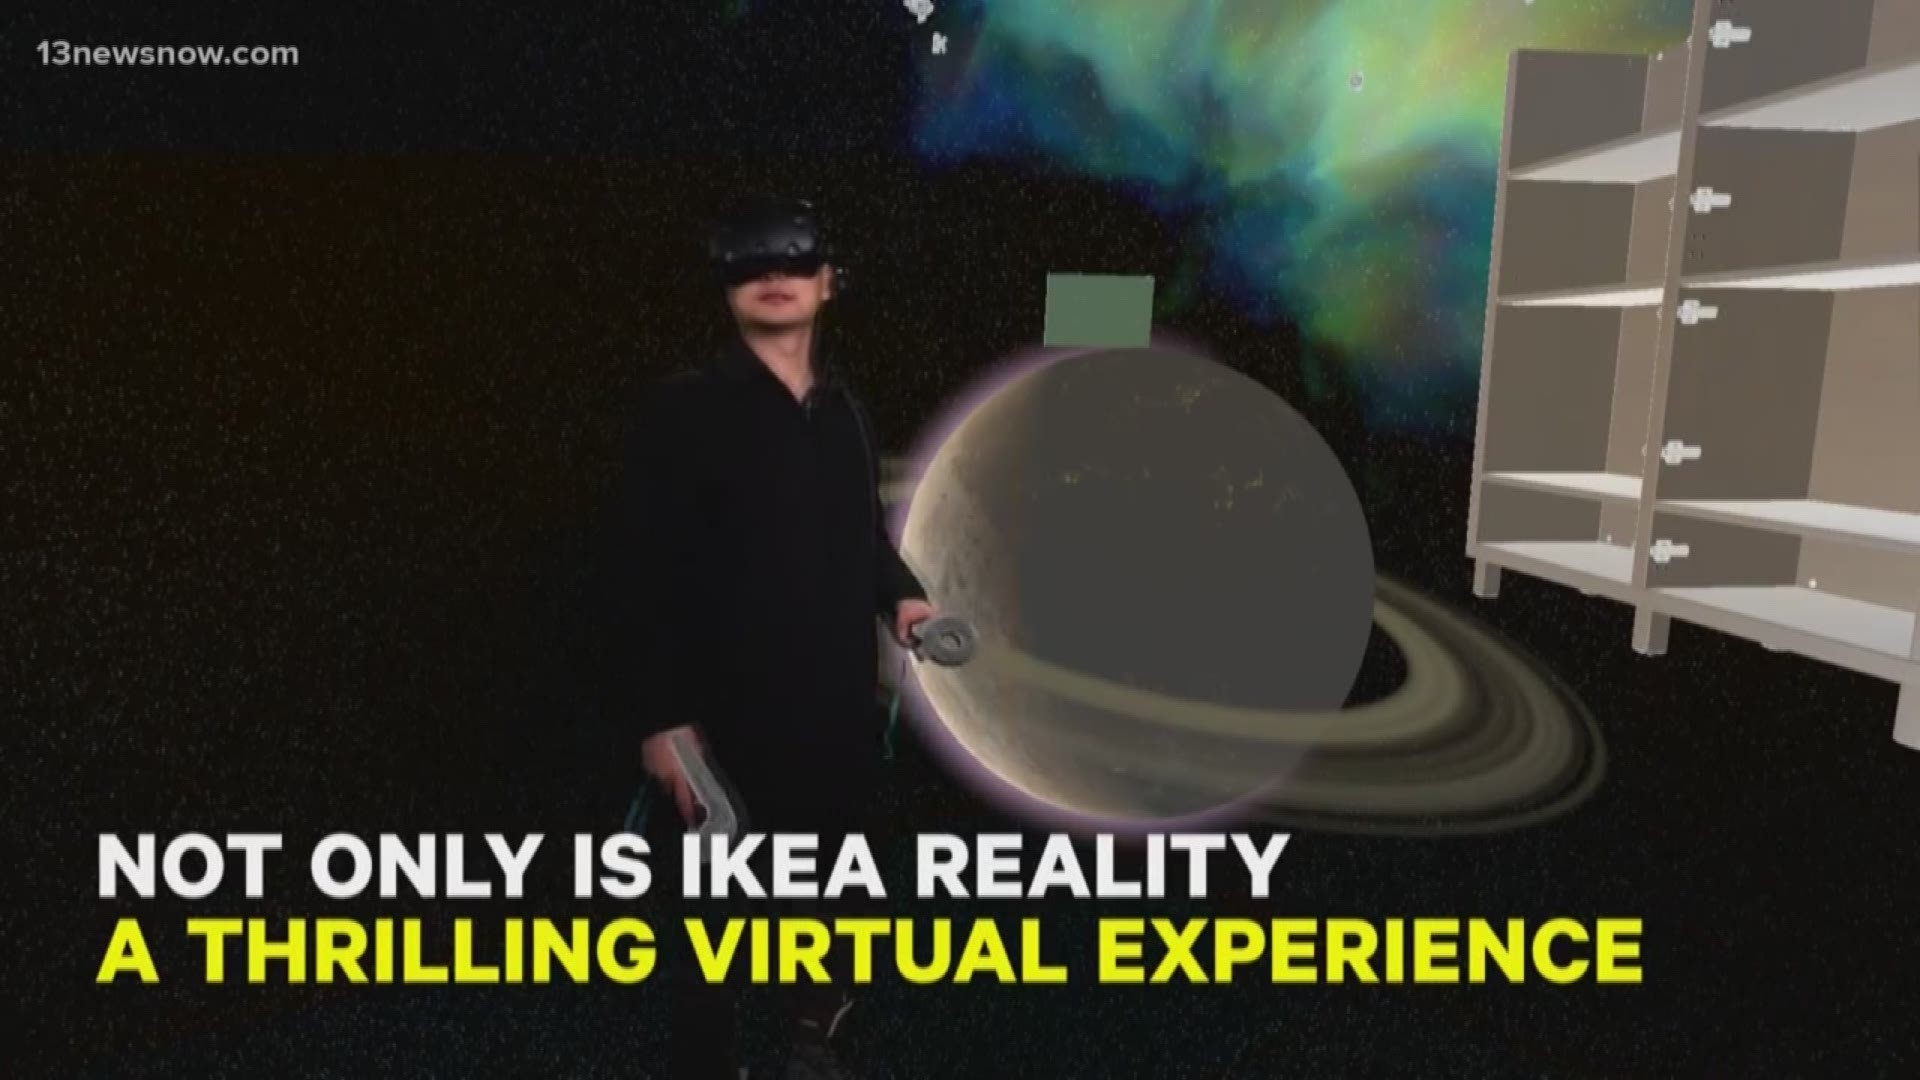 IKEA reality is avirtual reality tool that allows users to furnish a room using IKEA products so customers know exactly what they need.